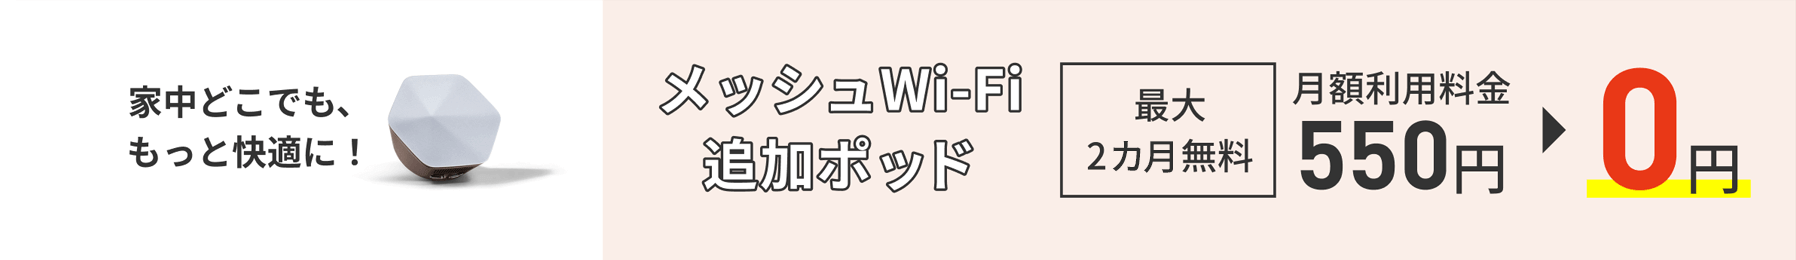 Be more comfortable anywhere in your home! Messhu Wi-Fi additional pod Up to 2 months free Monthly usage fee 550 yen → 0 yen